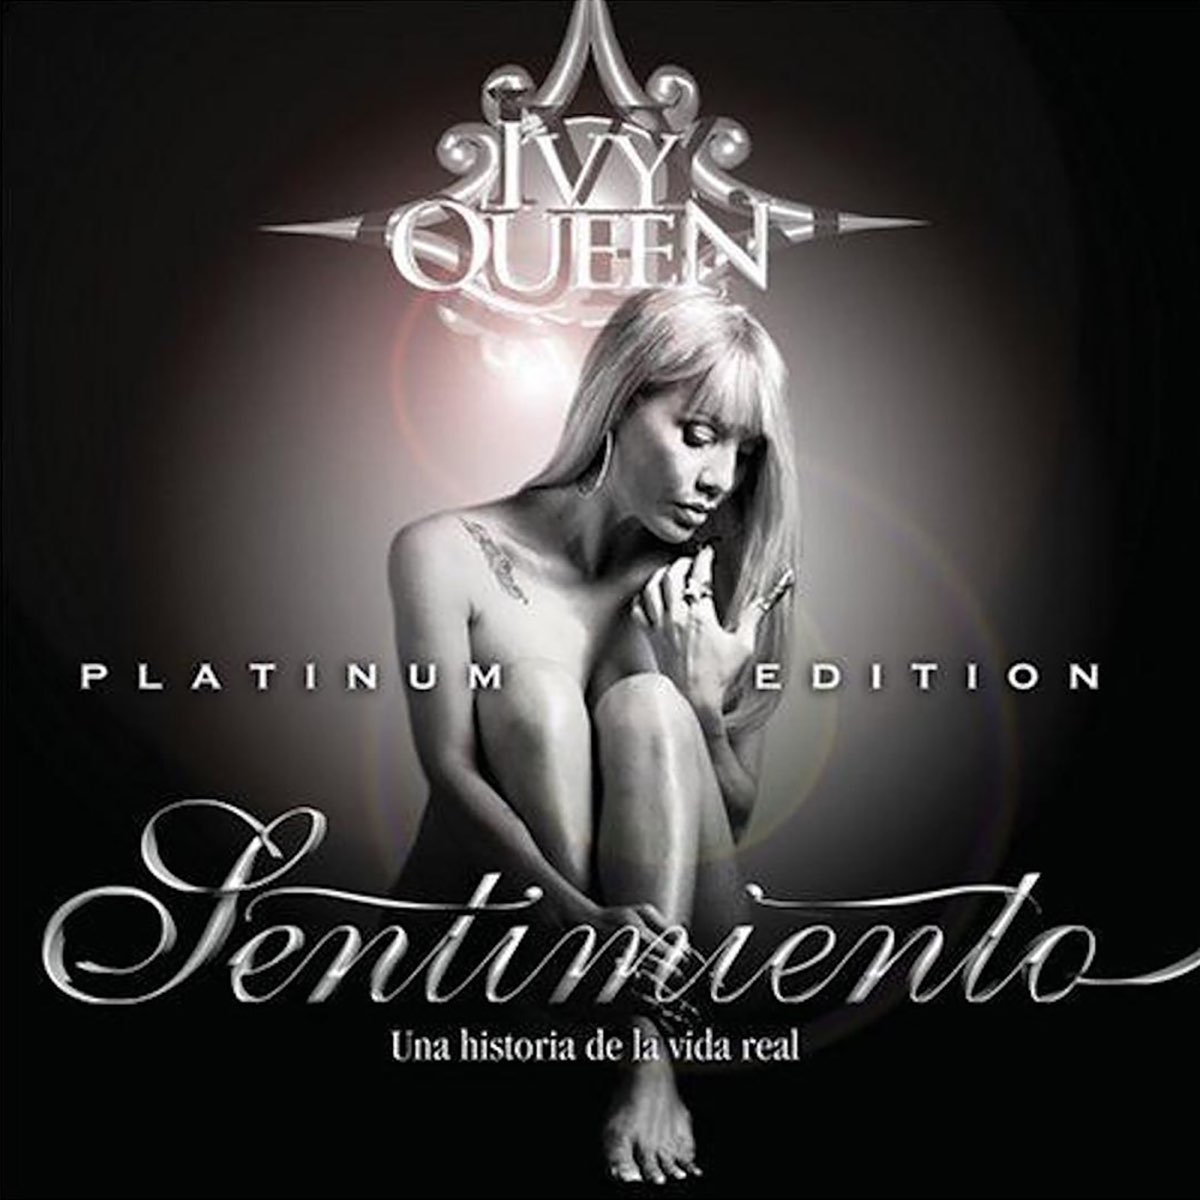 sentimiento by ivy queen on apple